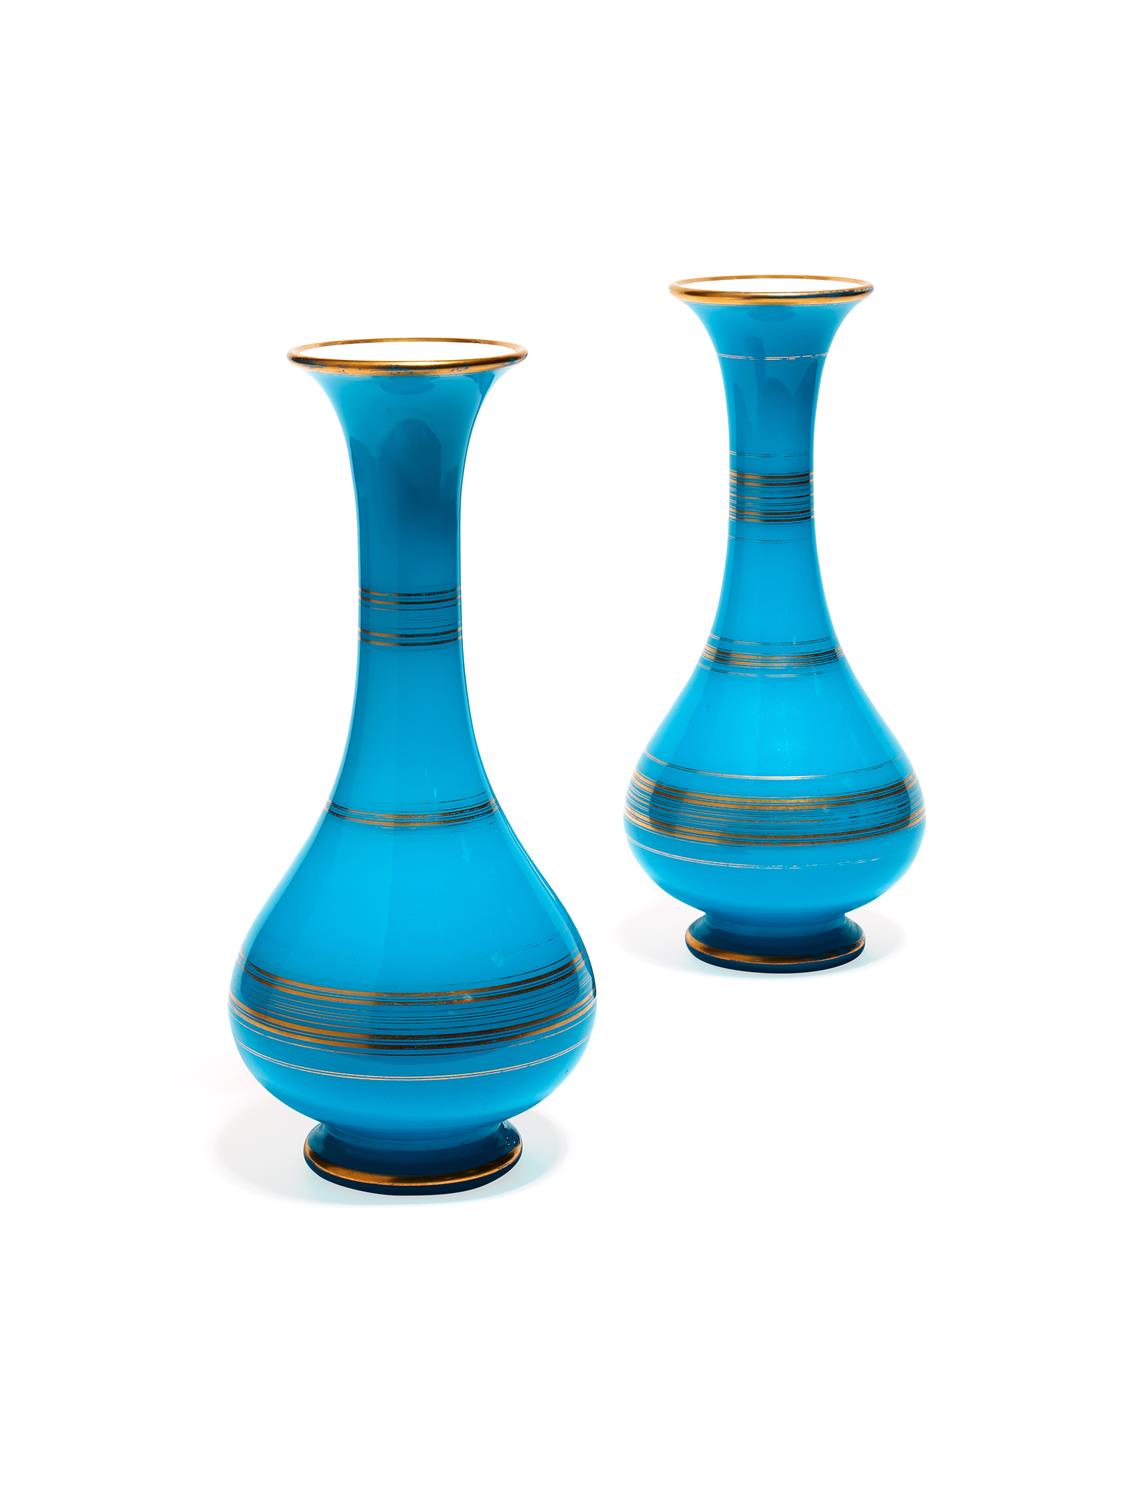 A pair of turquoise-blue opalescent glass vases